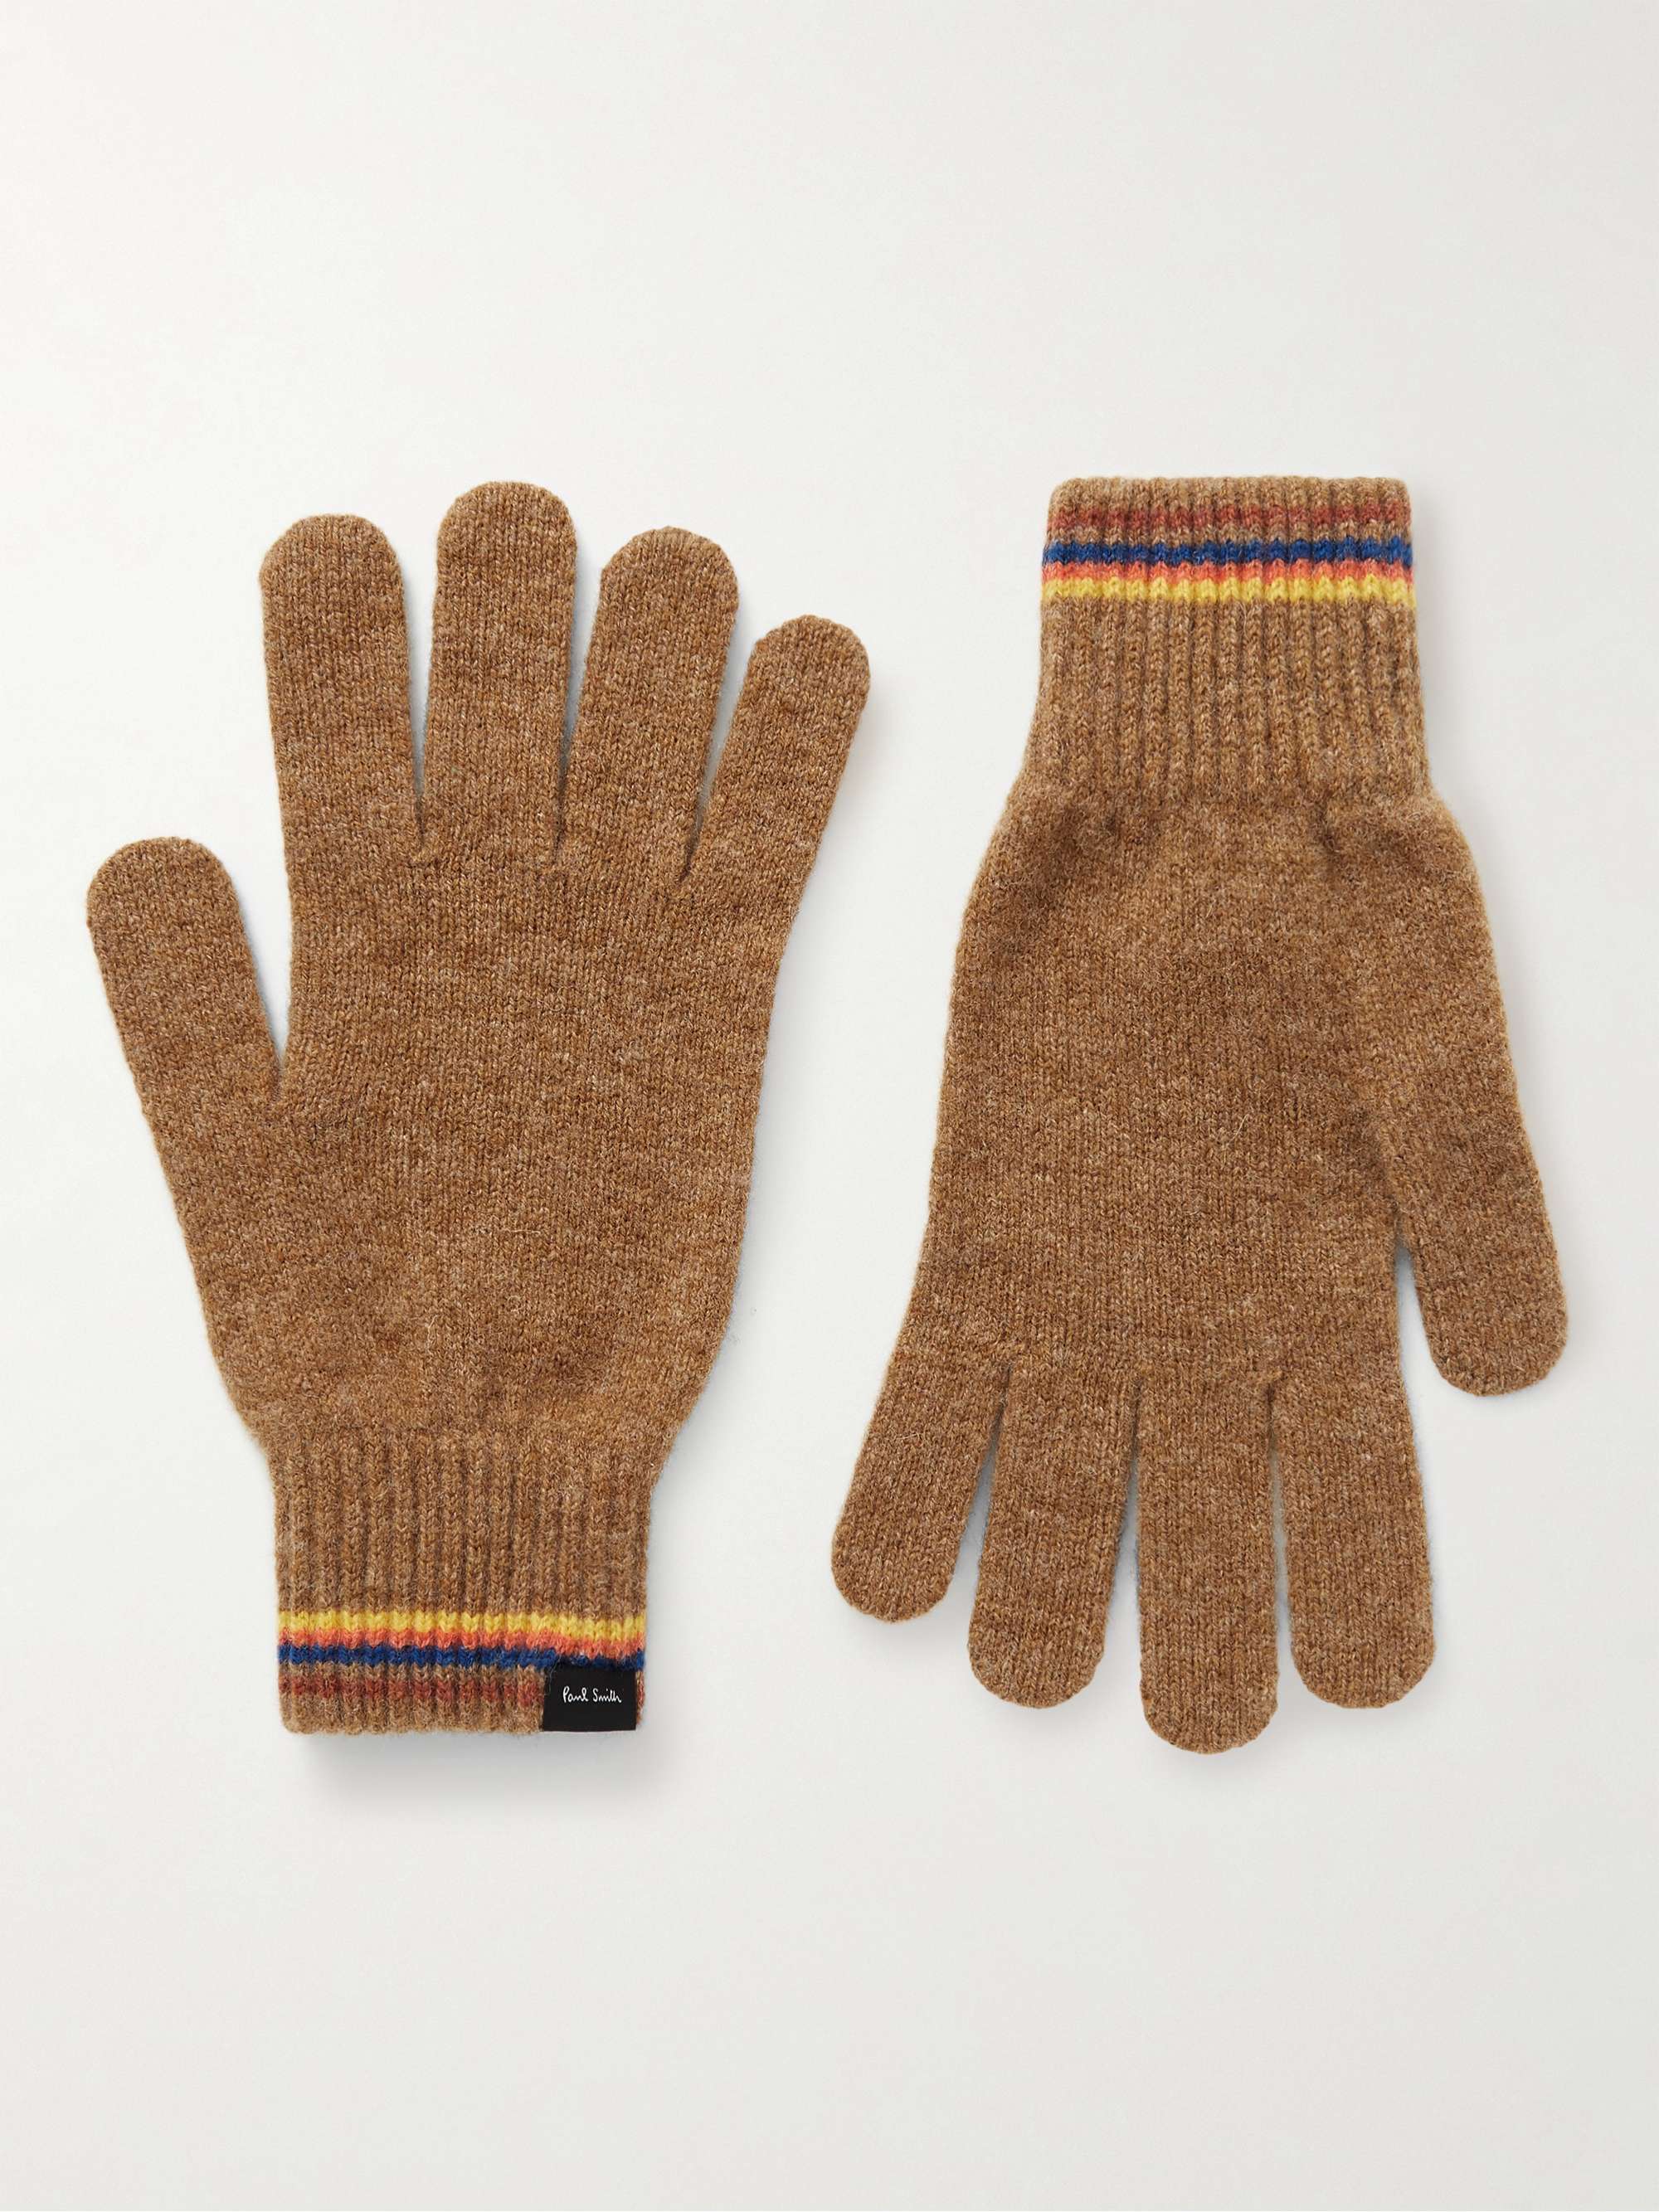 PAUL SMITH Striped Intarsia Wool Gloves